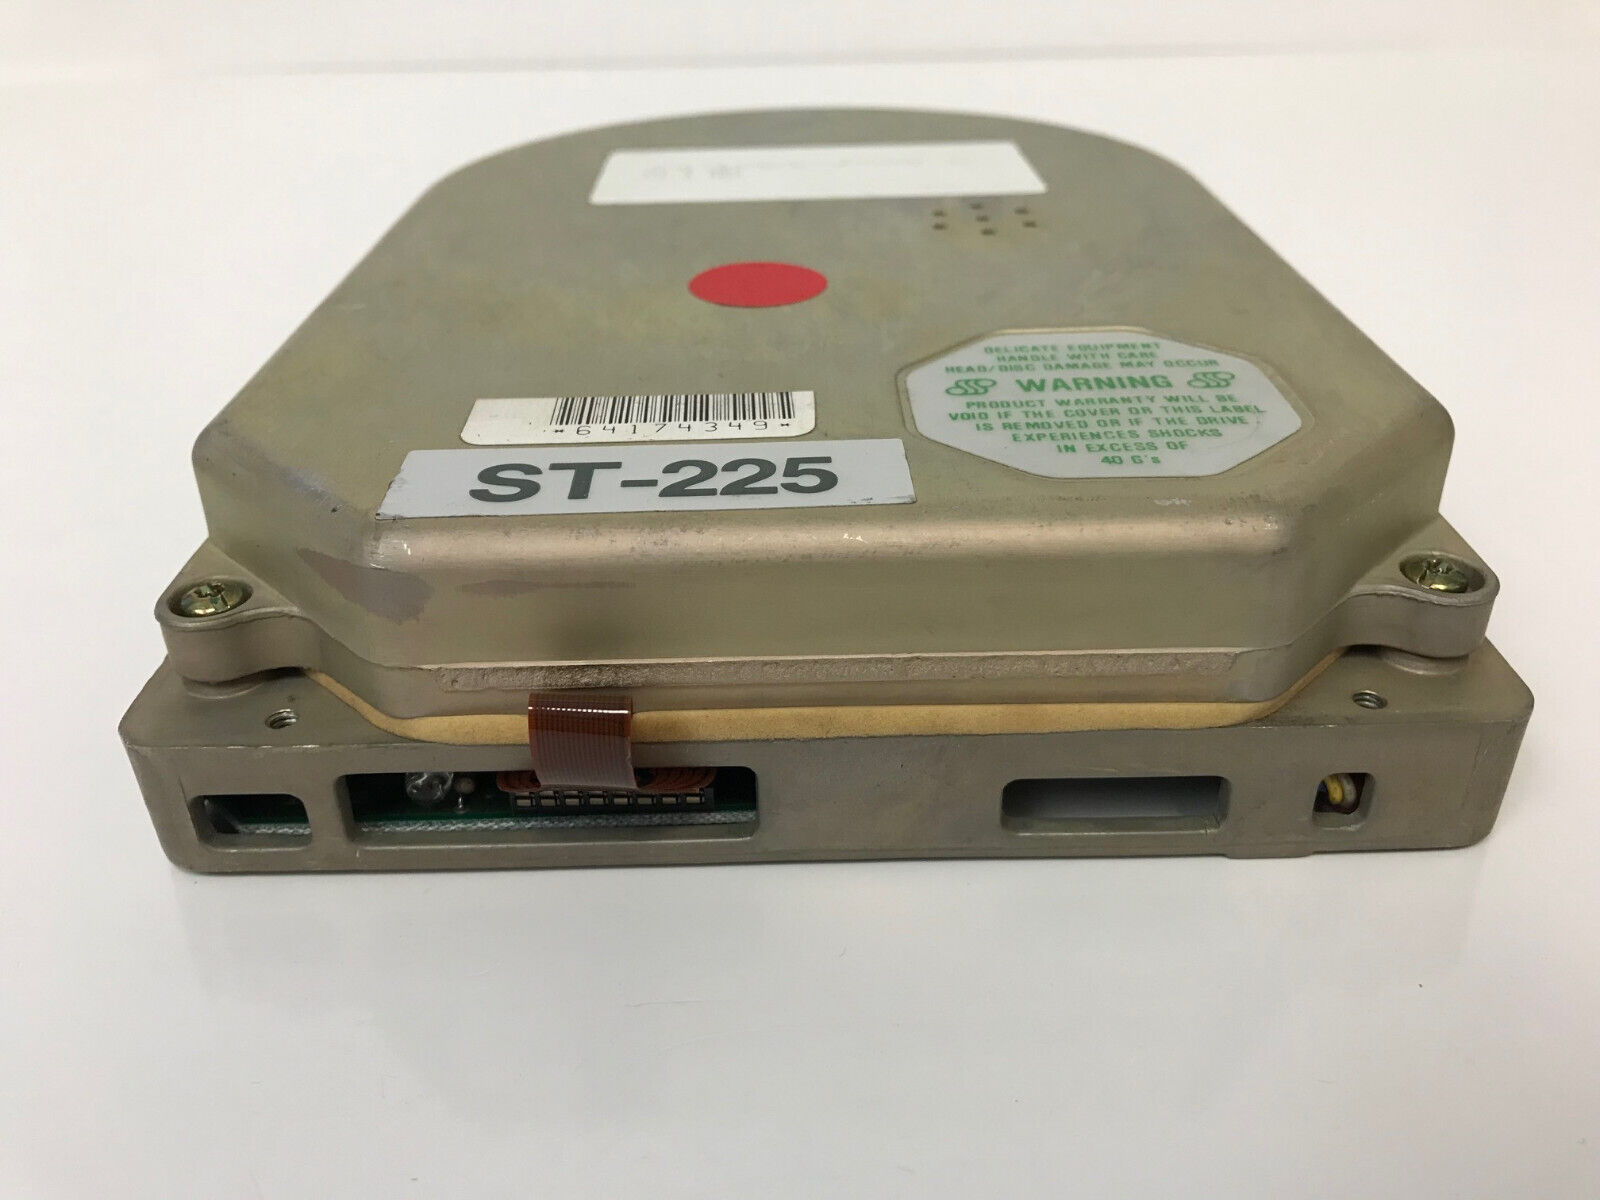 SEAGATE ST-225 ST225 20MB 5.25 MFM HARD DRIVE AS-IS FOR PARTS OR REPAIR